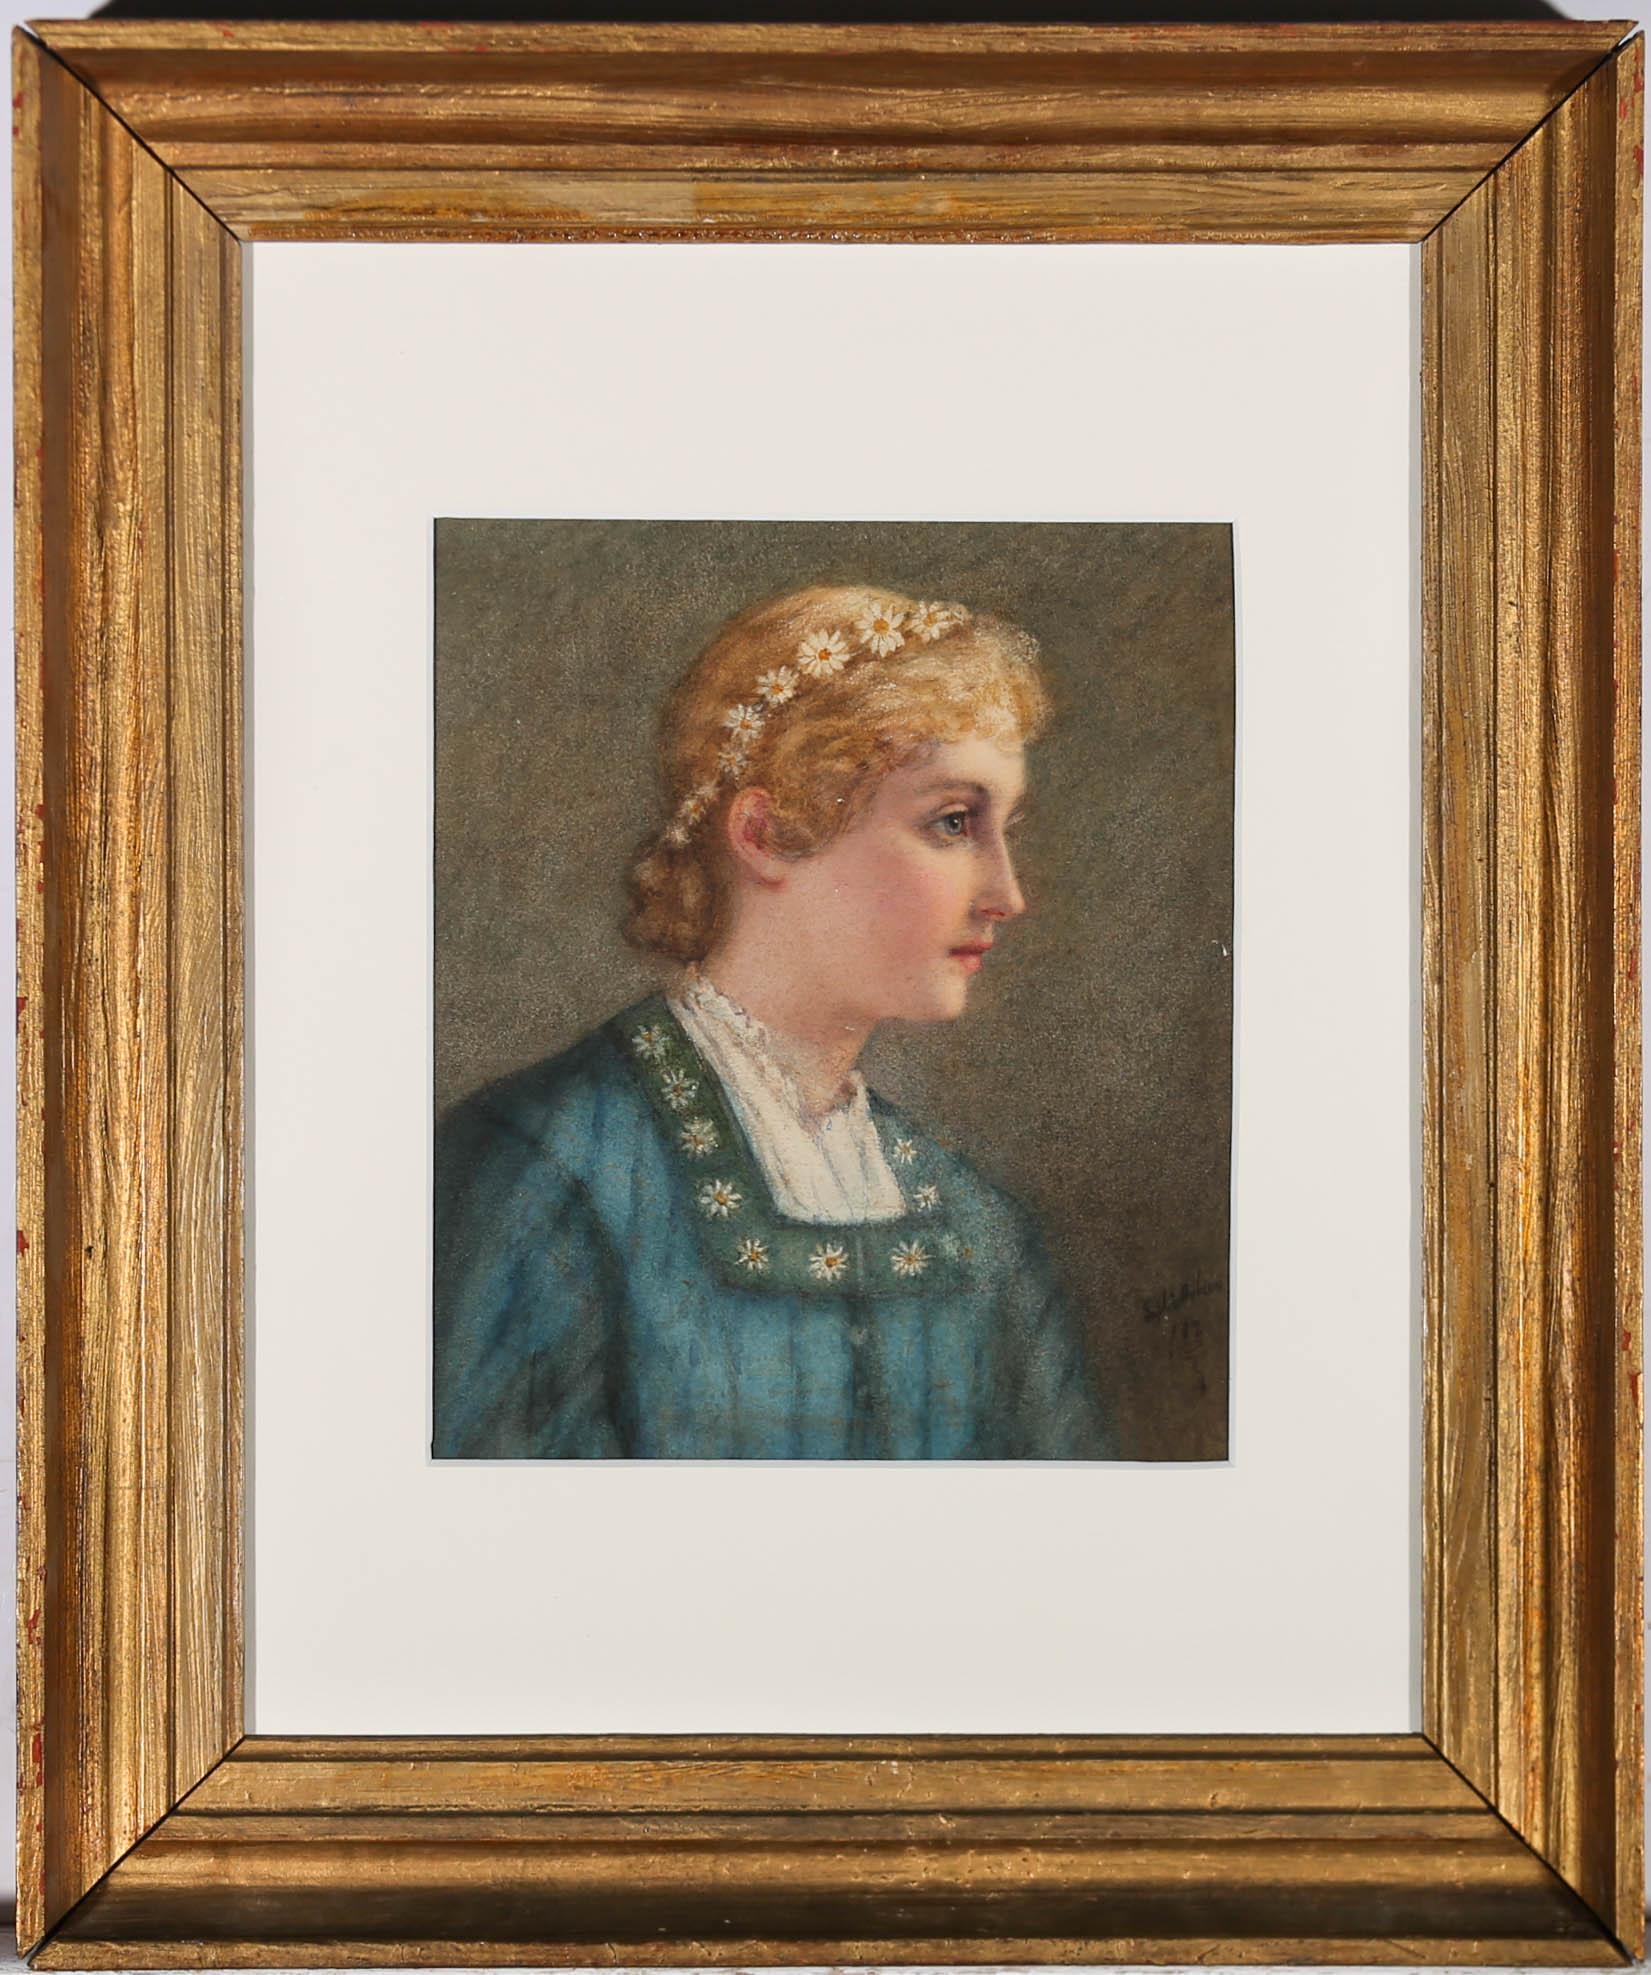 This accomplished watercolours portrait depicts a girl with a chain of daisies in her blonde hair. The daisy motif is repeated in the collar of her blue dress. The artist captures the girl in fine detail #, drawing attention to her delicate features